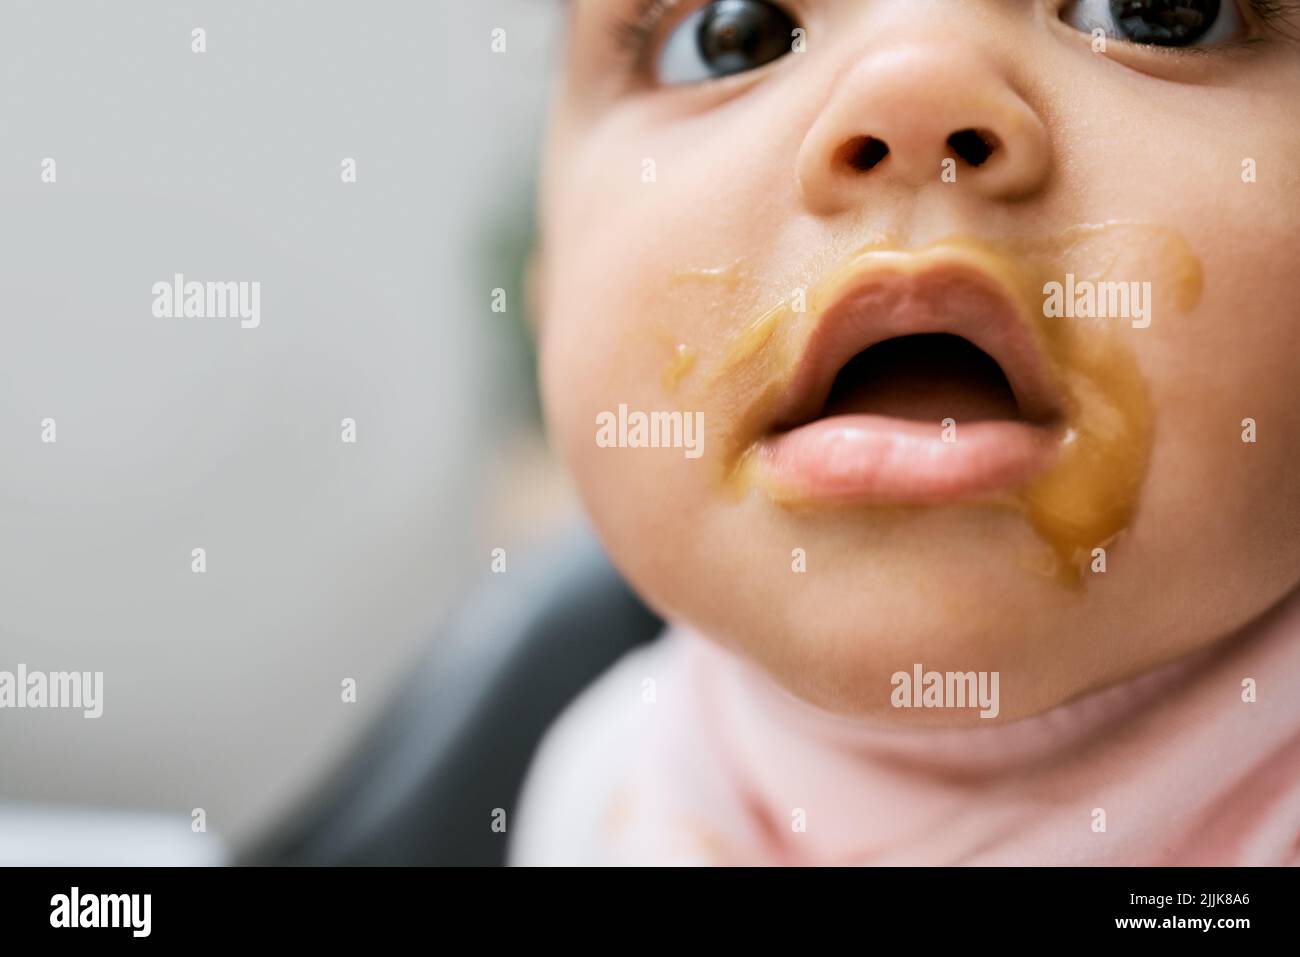 Gimme some more of that. an adorable baby girls mouth covered with baby food. Stock Photo